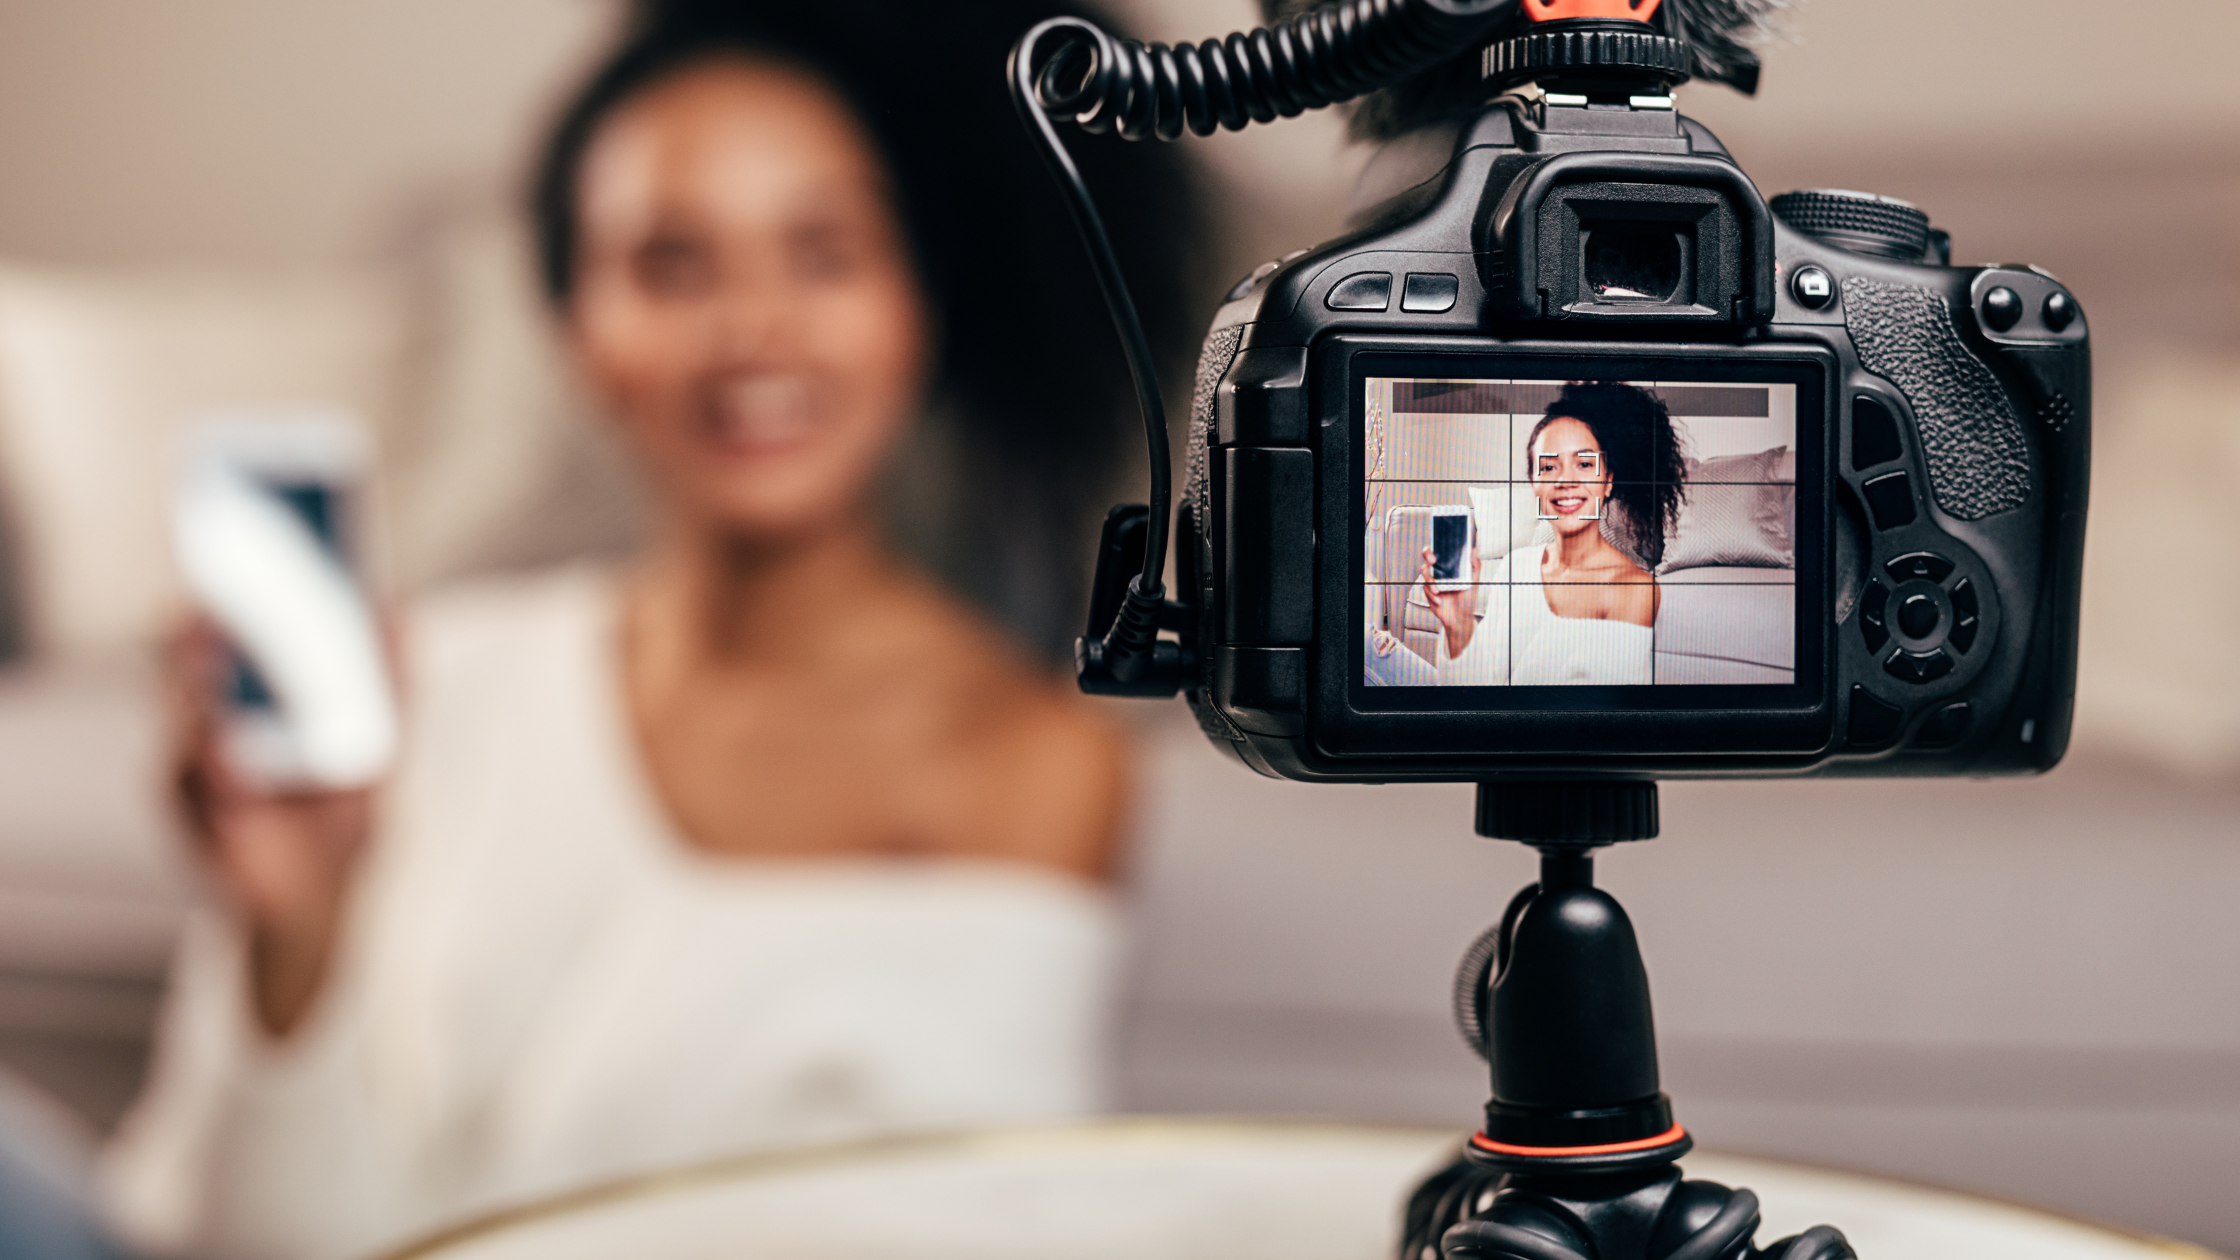 5 Video Marketing Ideas To Level the Playing Field for Your Small Business